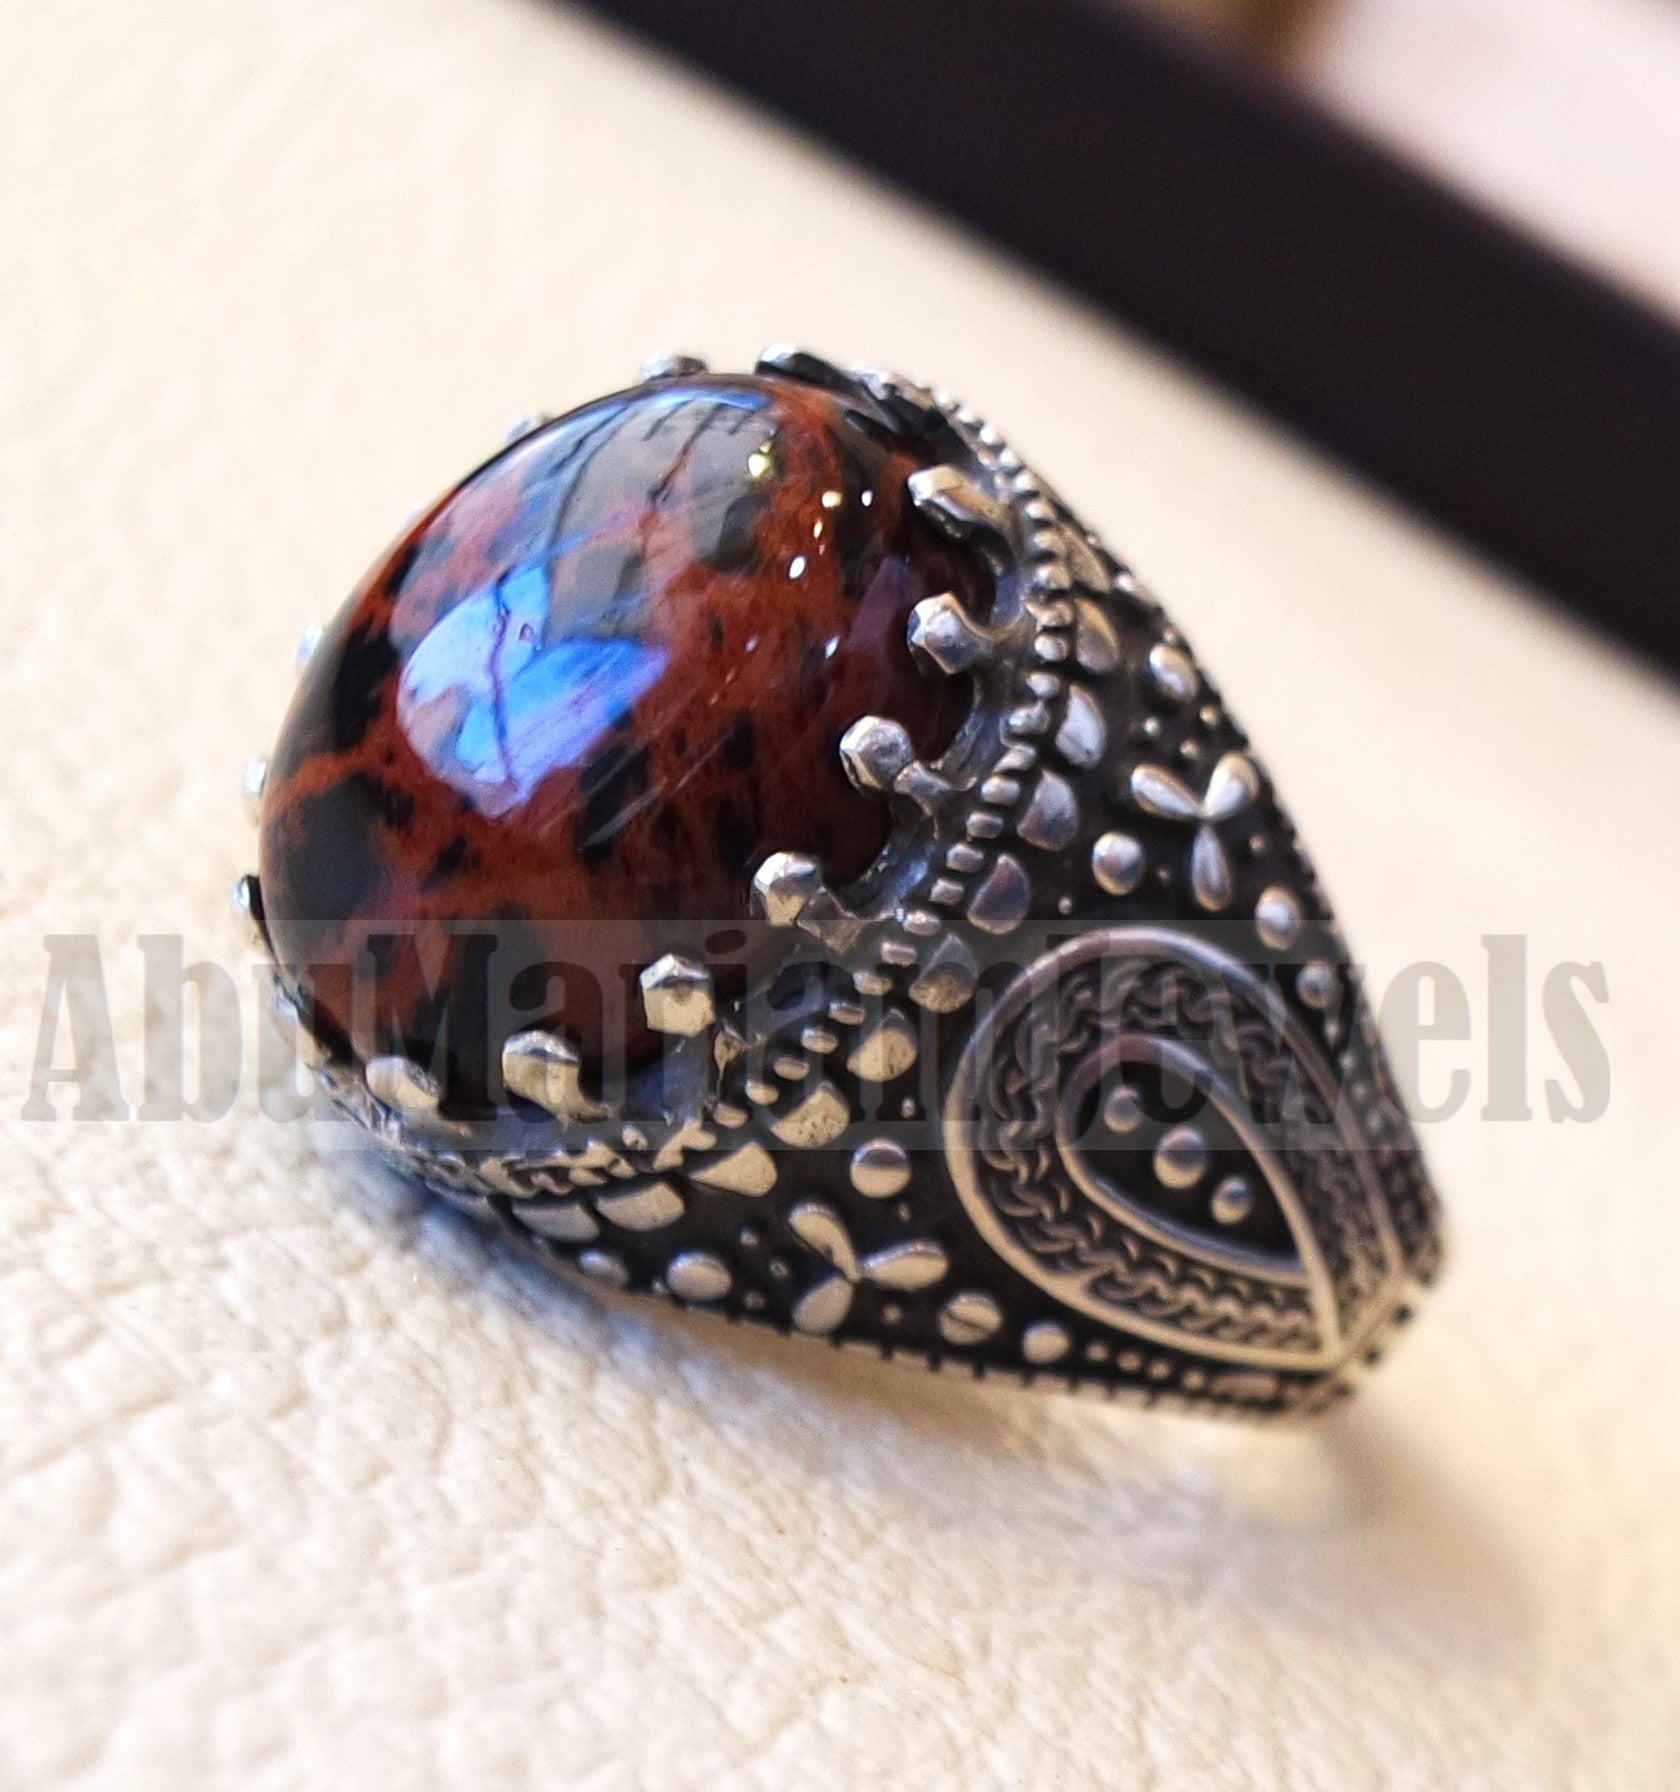 mahagony obsidian man ring stone natural gem sterling silver 925 ring brown and black oval semi precious cabochon jewelry protective stone